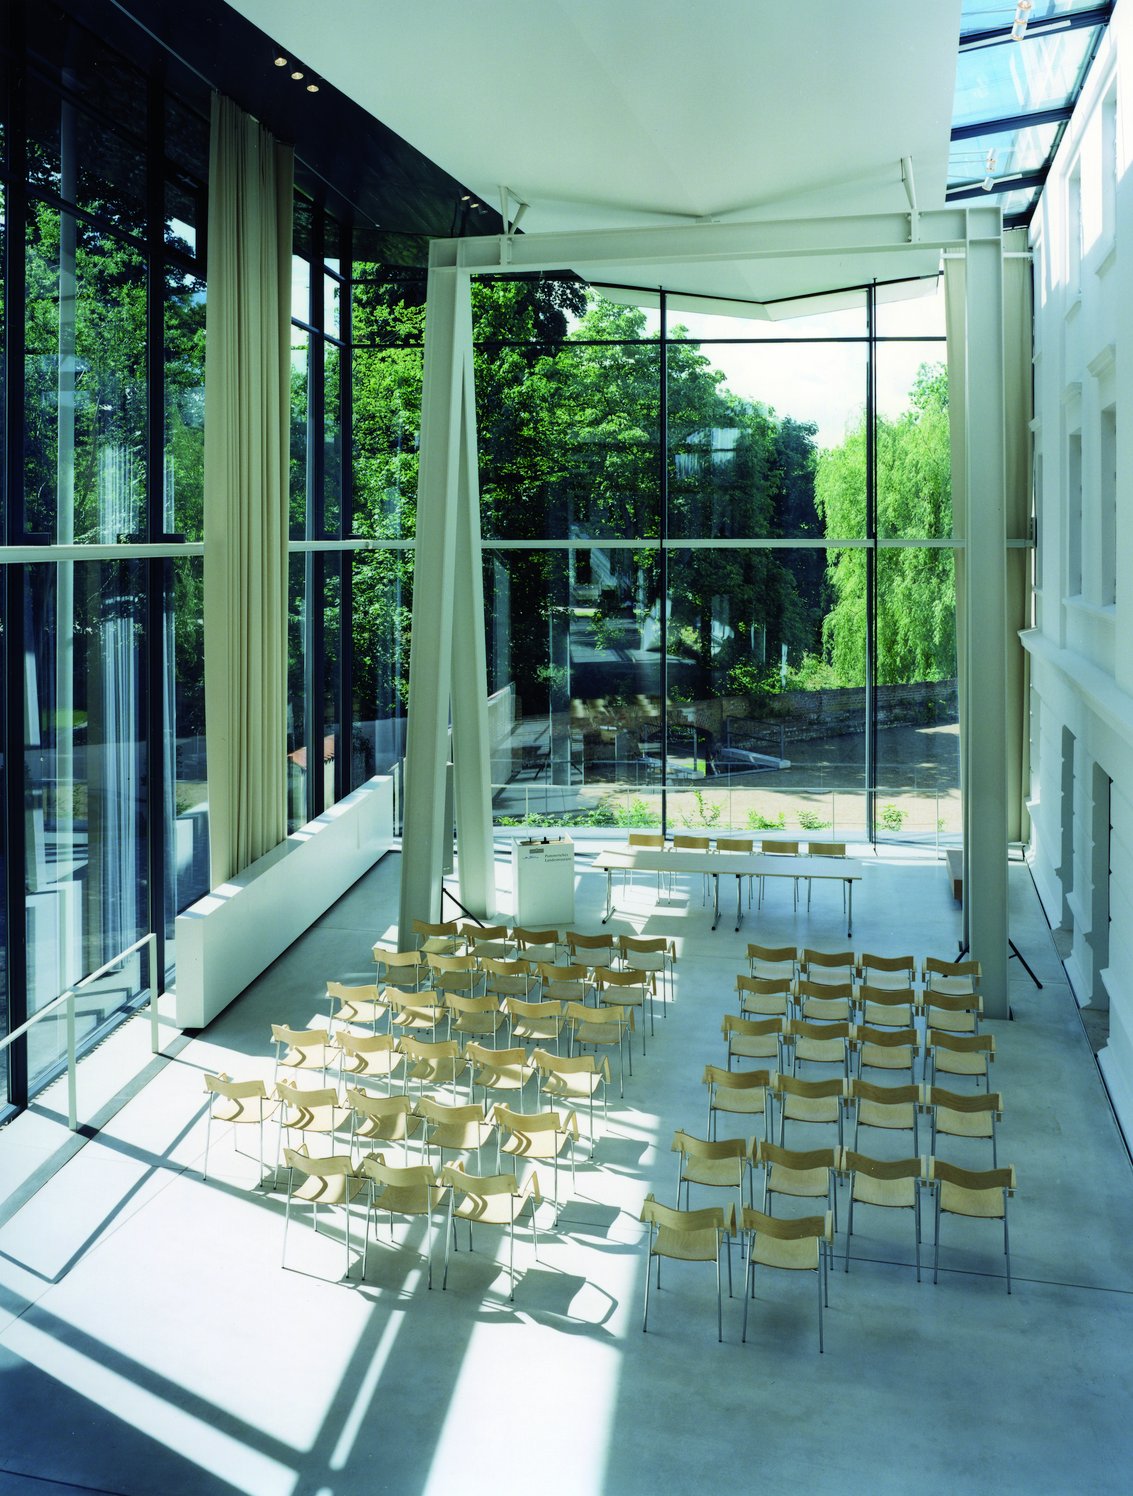 Seating in the Museumsstraße, configured as a lecture hall